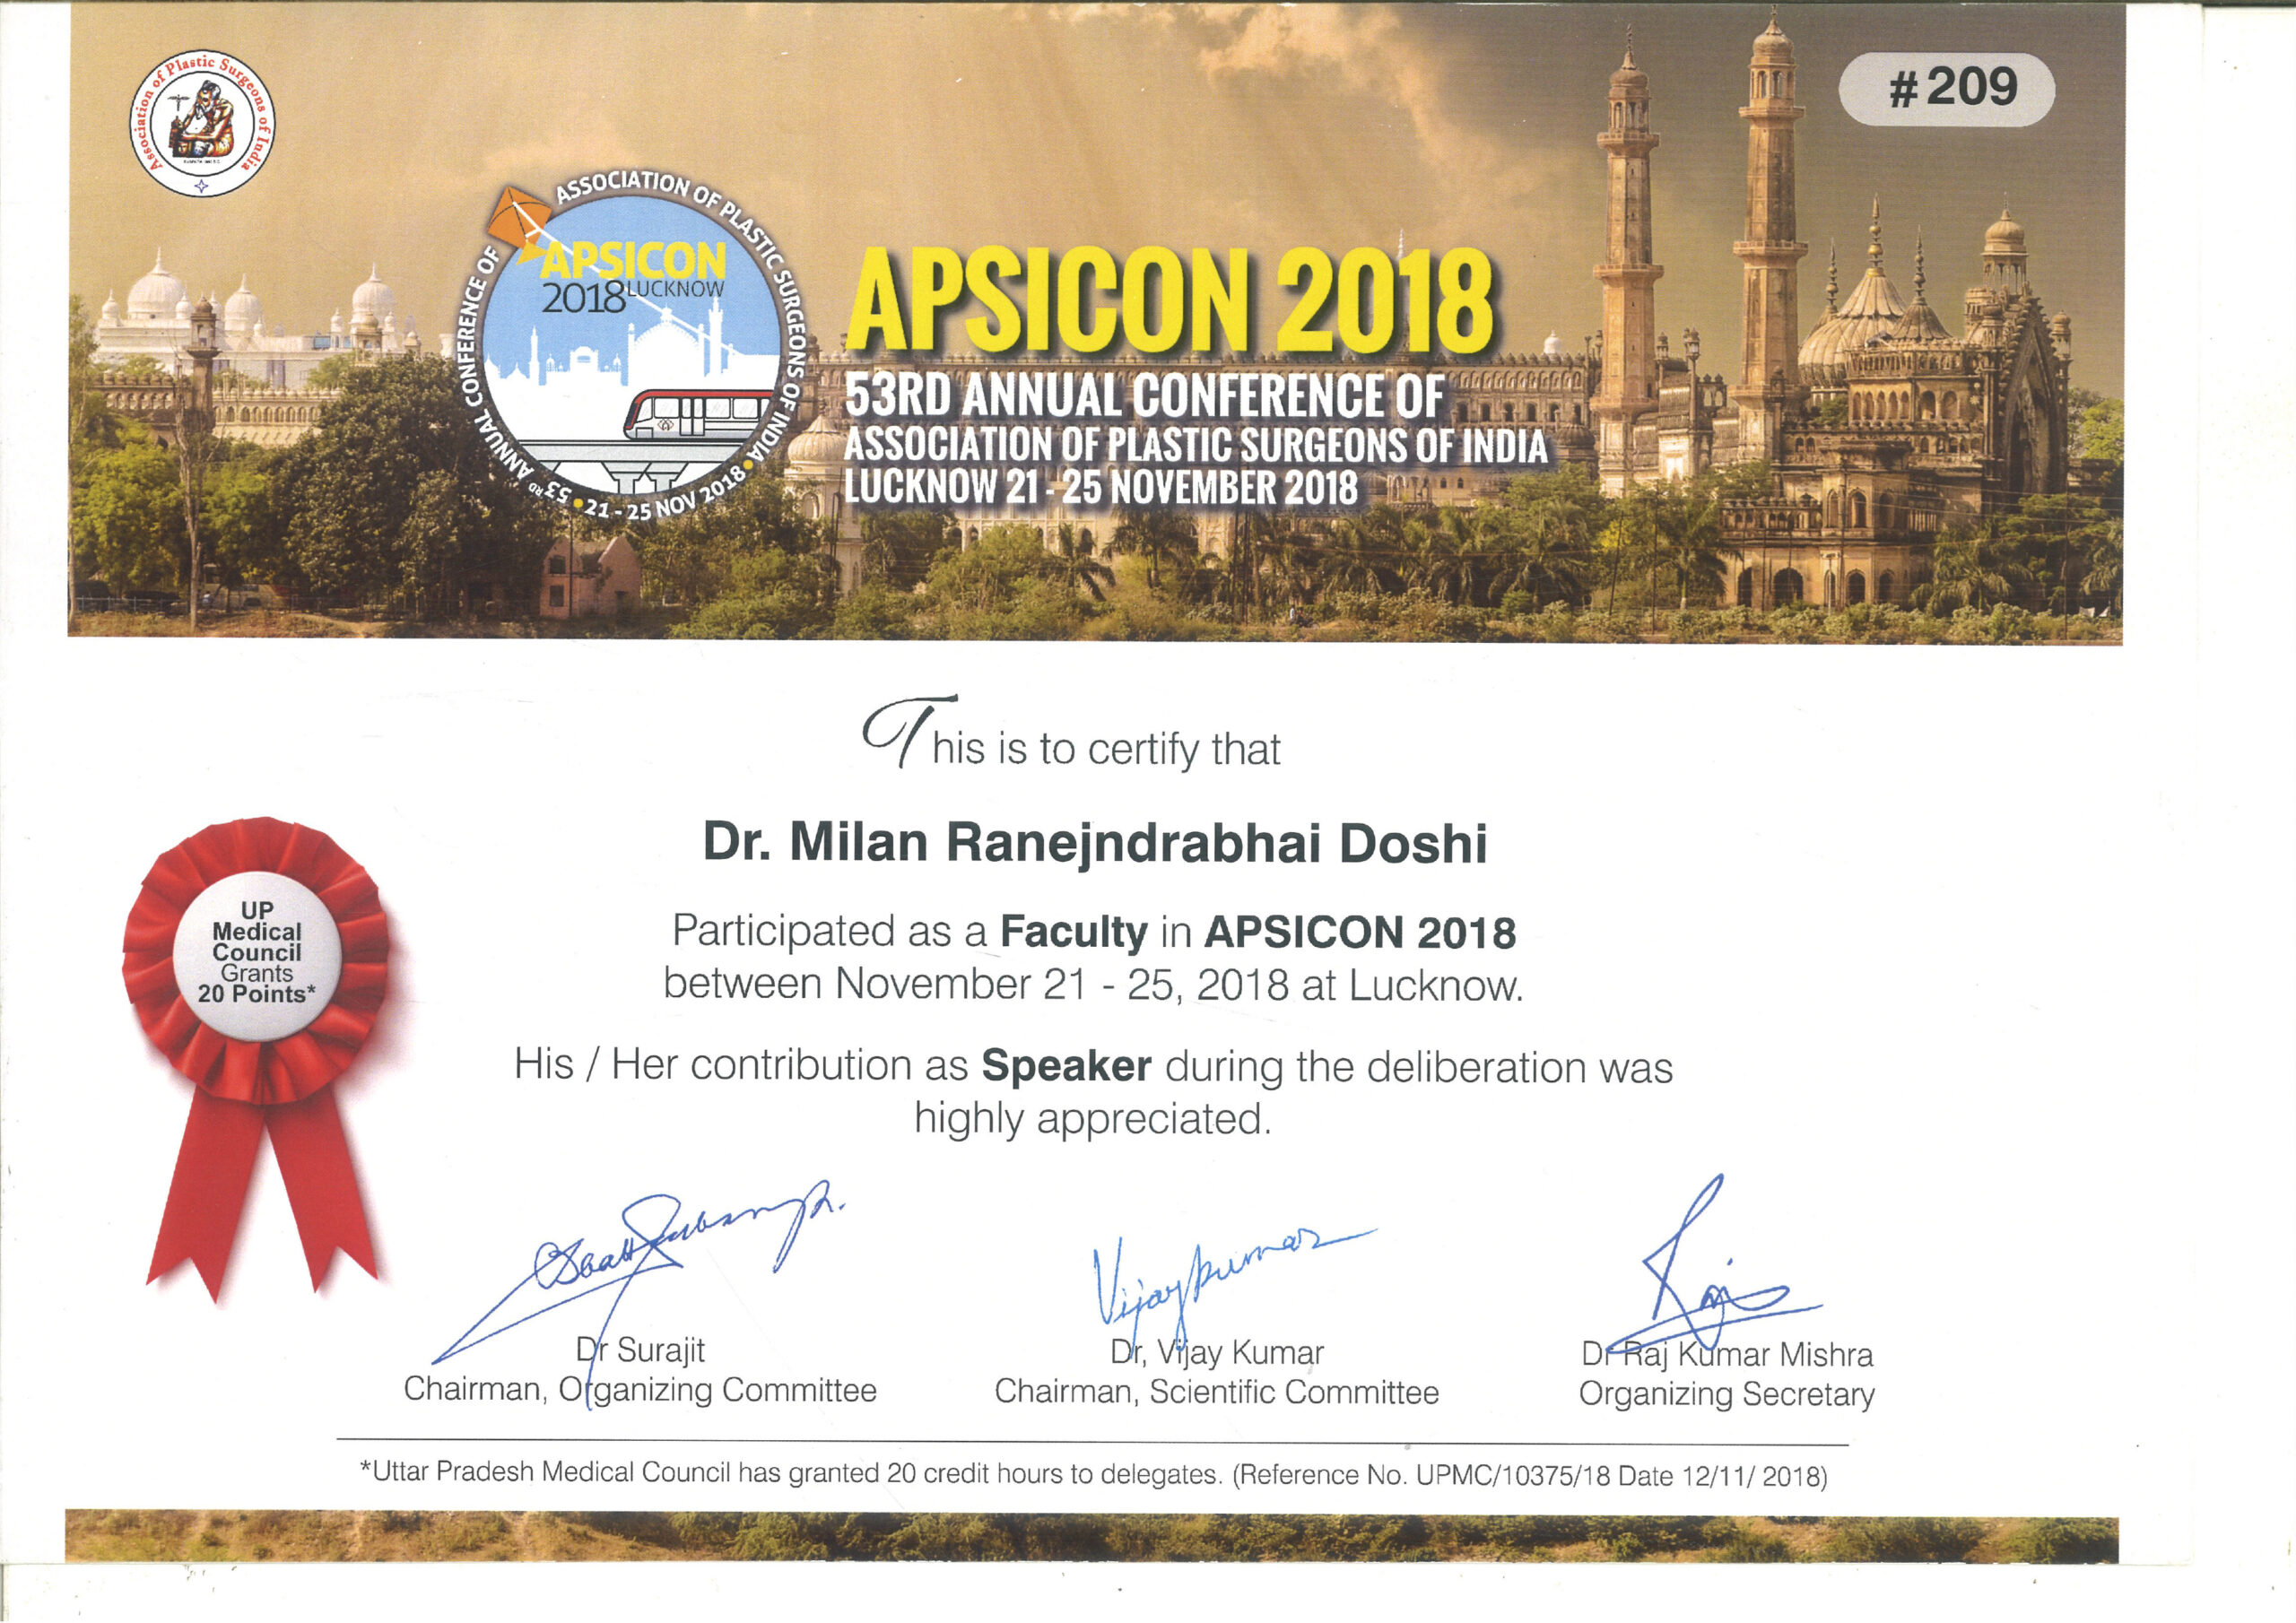 53rd Annual Conference of the Association of Plastic Surgeons of India, Lucknow on 21st to 25th November, 2018